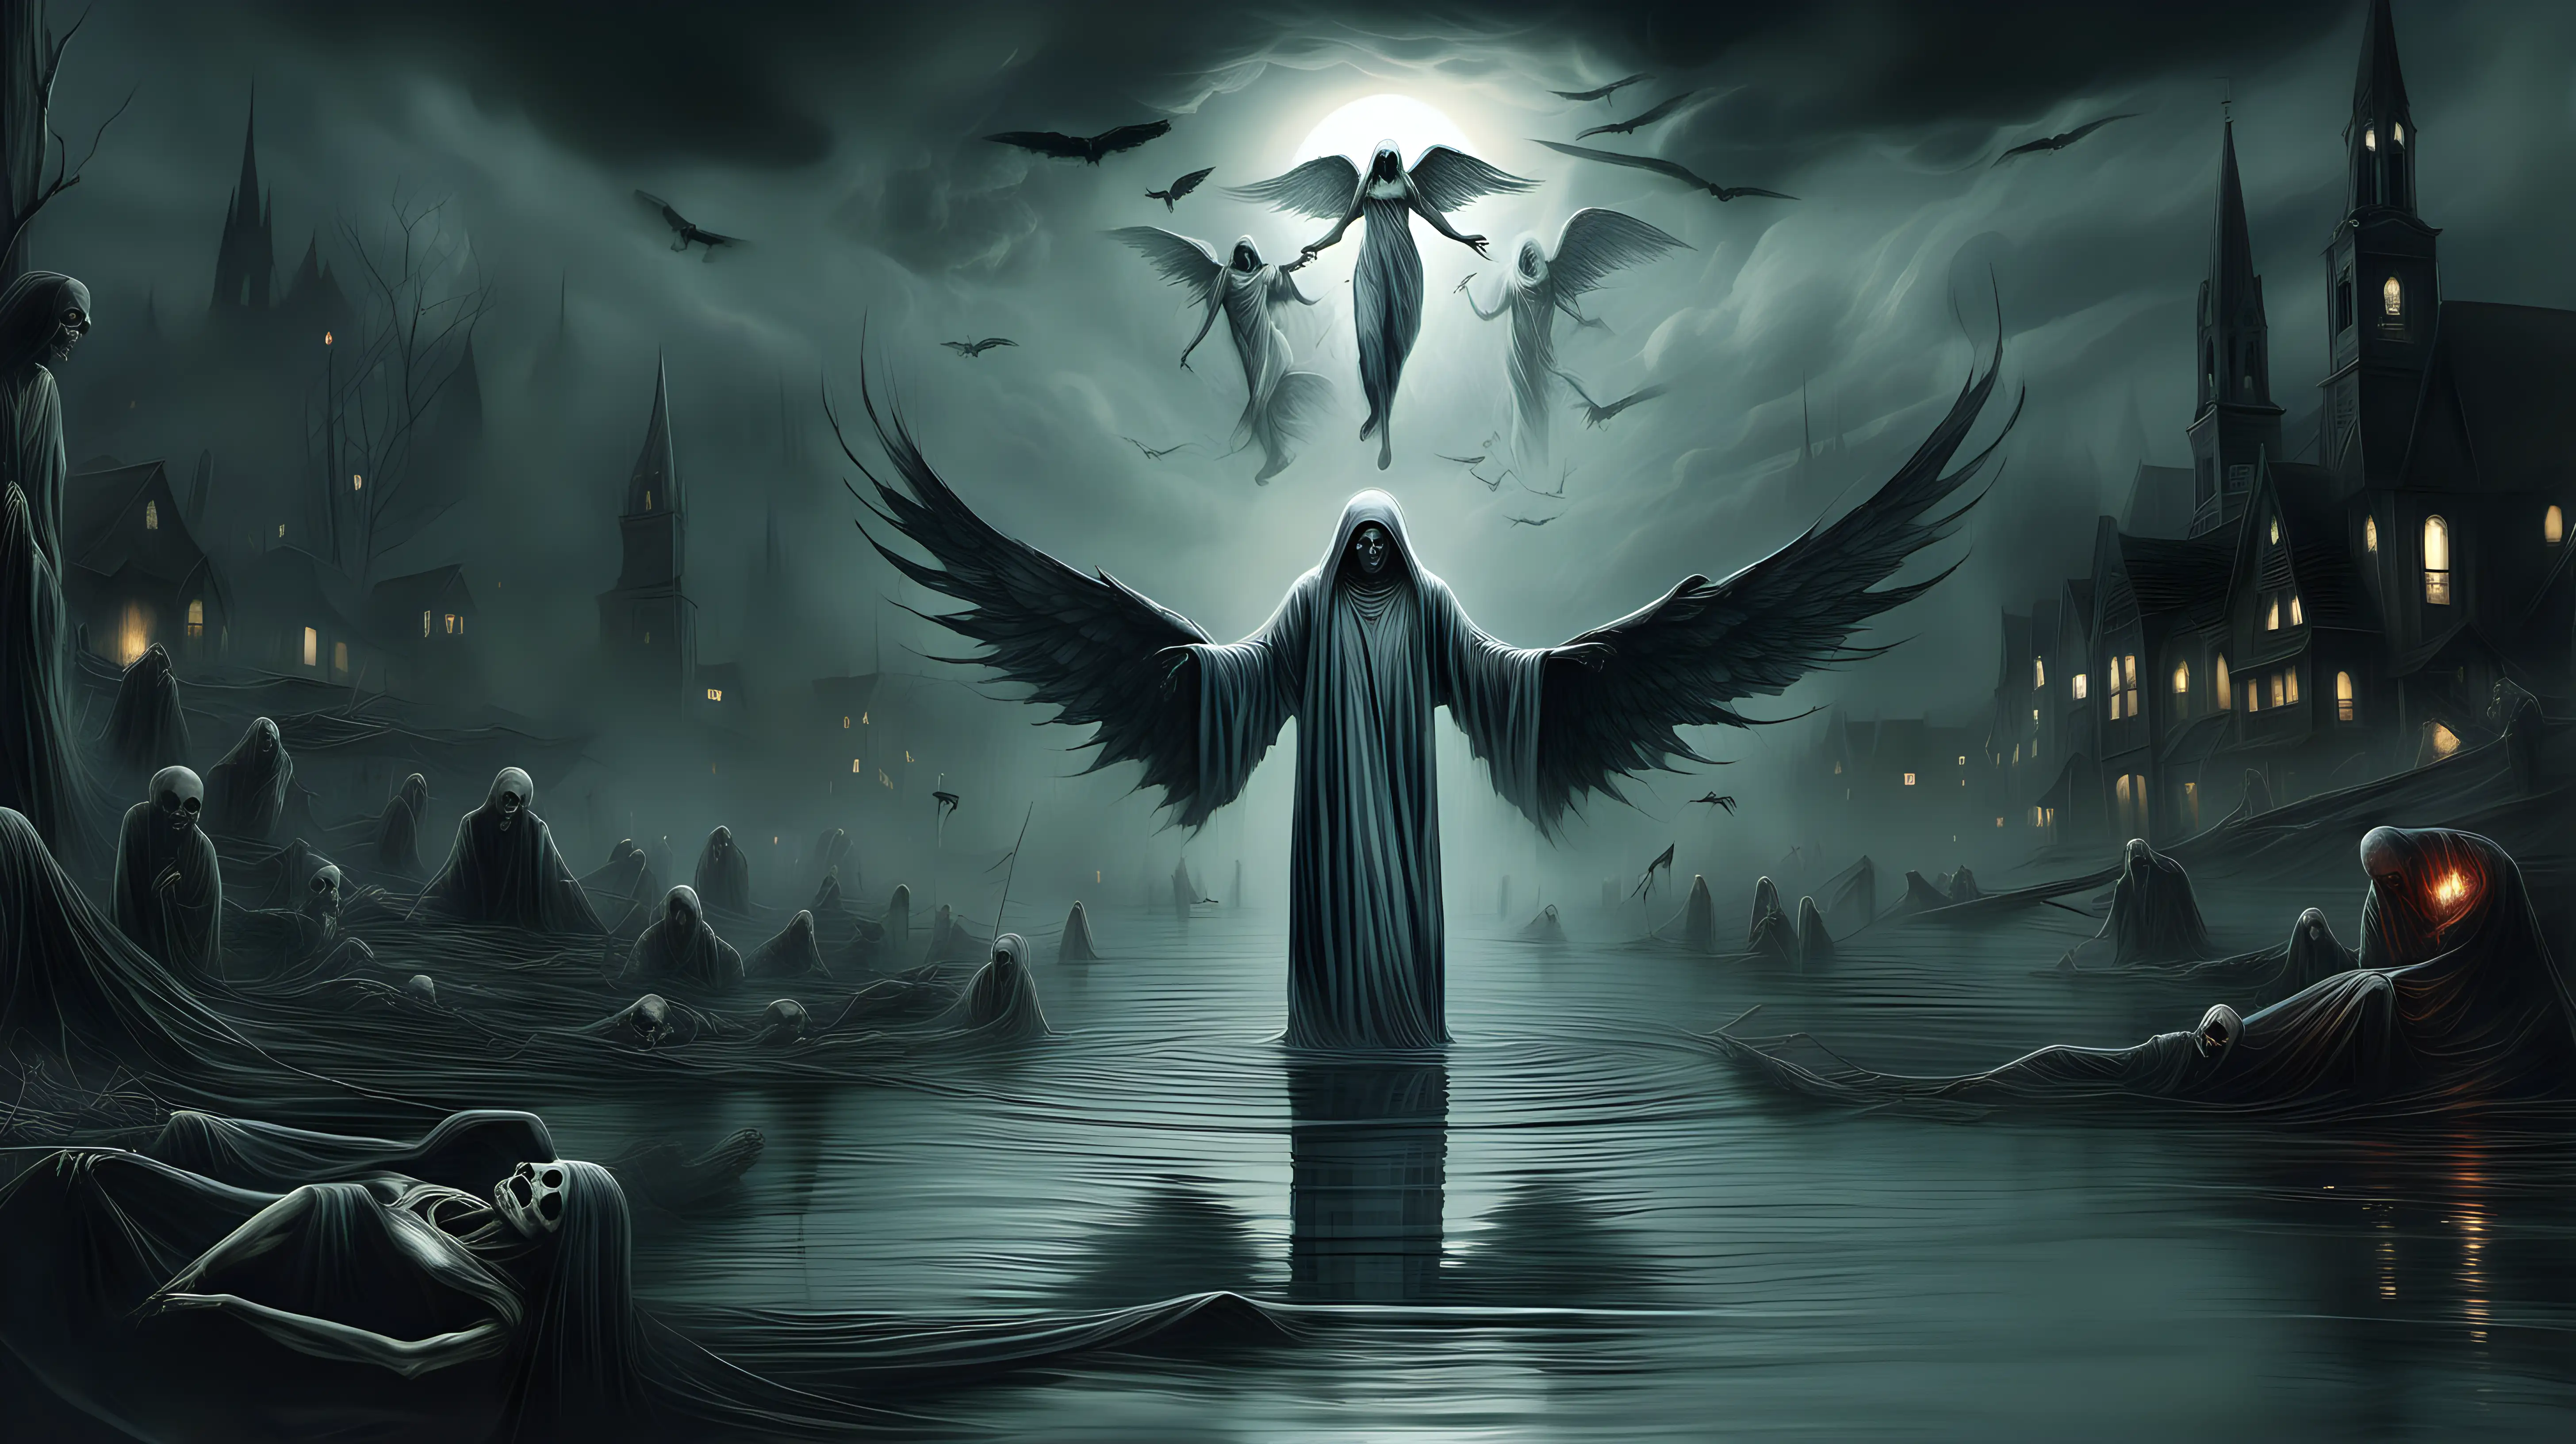 "Design a chilling portrayal of the Angel of Death looming over a ghostly river, its reflection revealing the tormented faces of those who have met their demise."